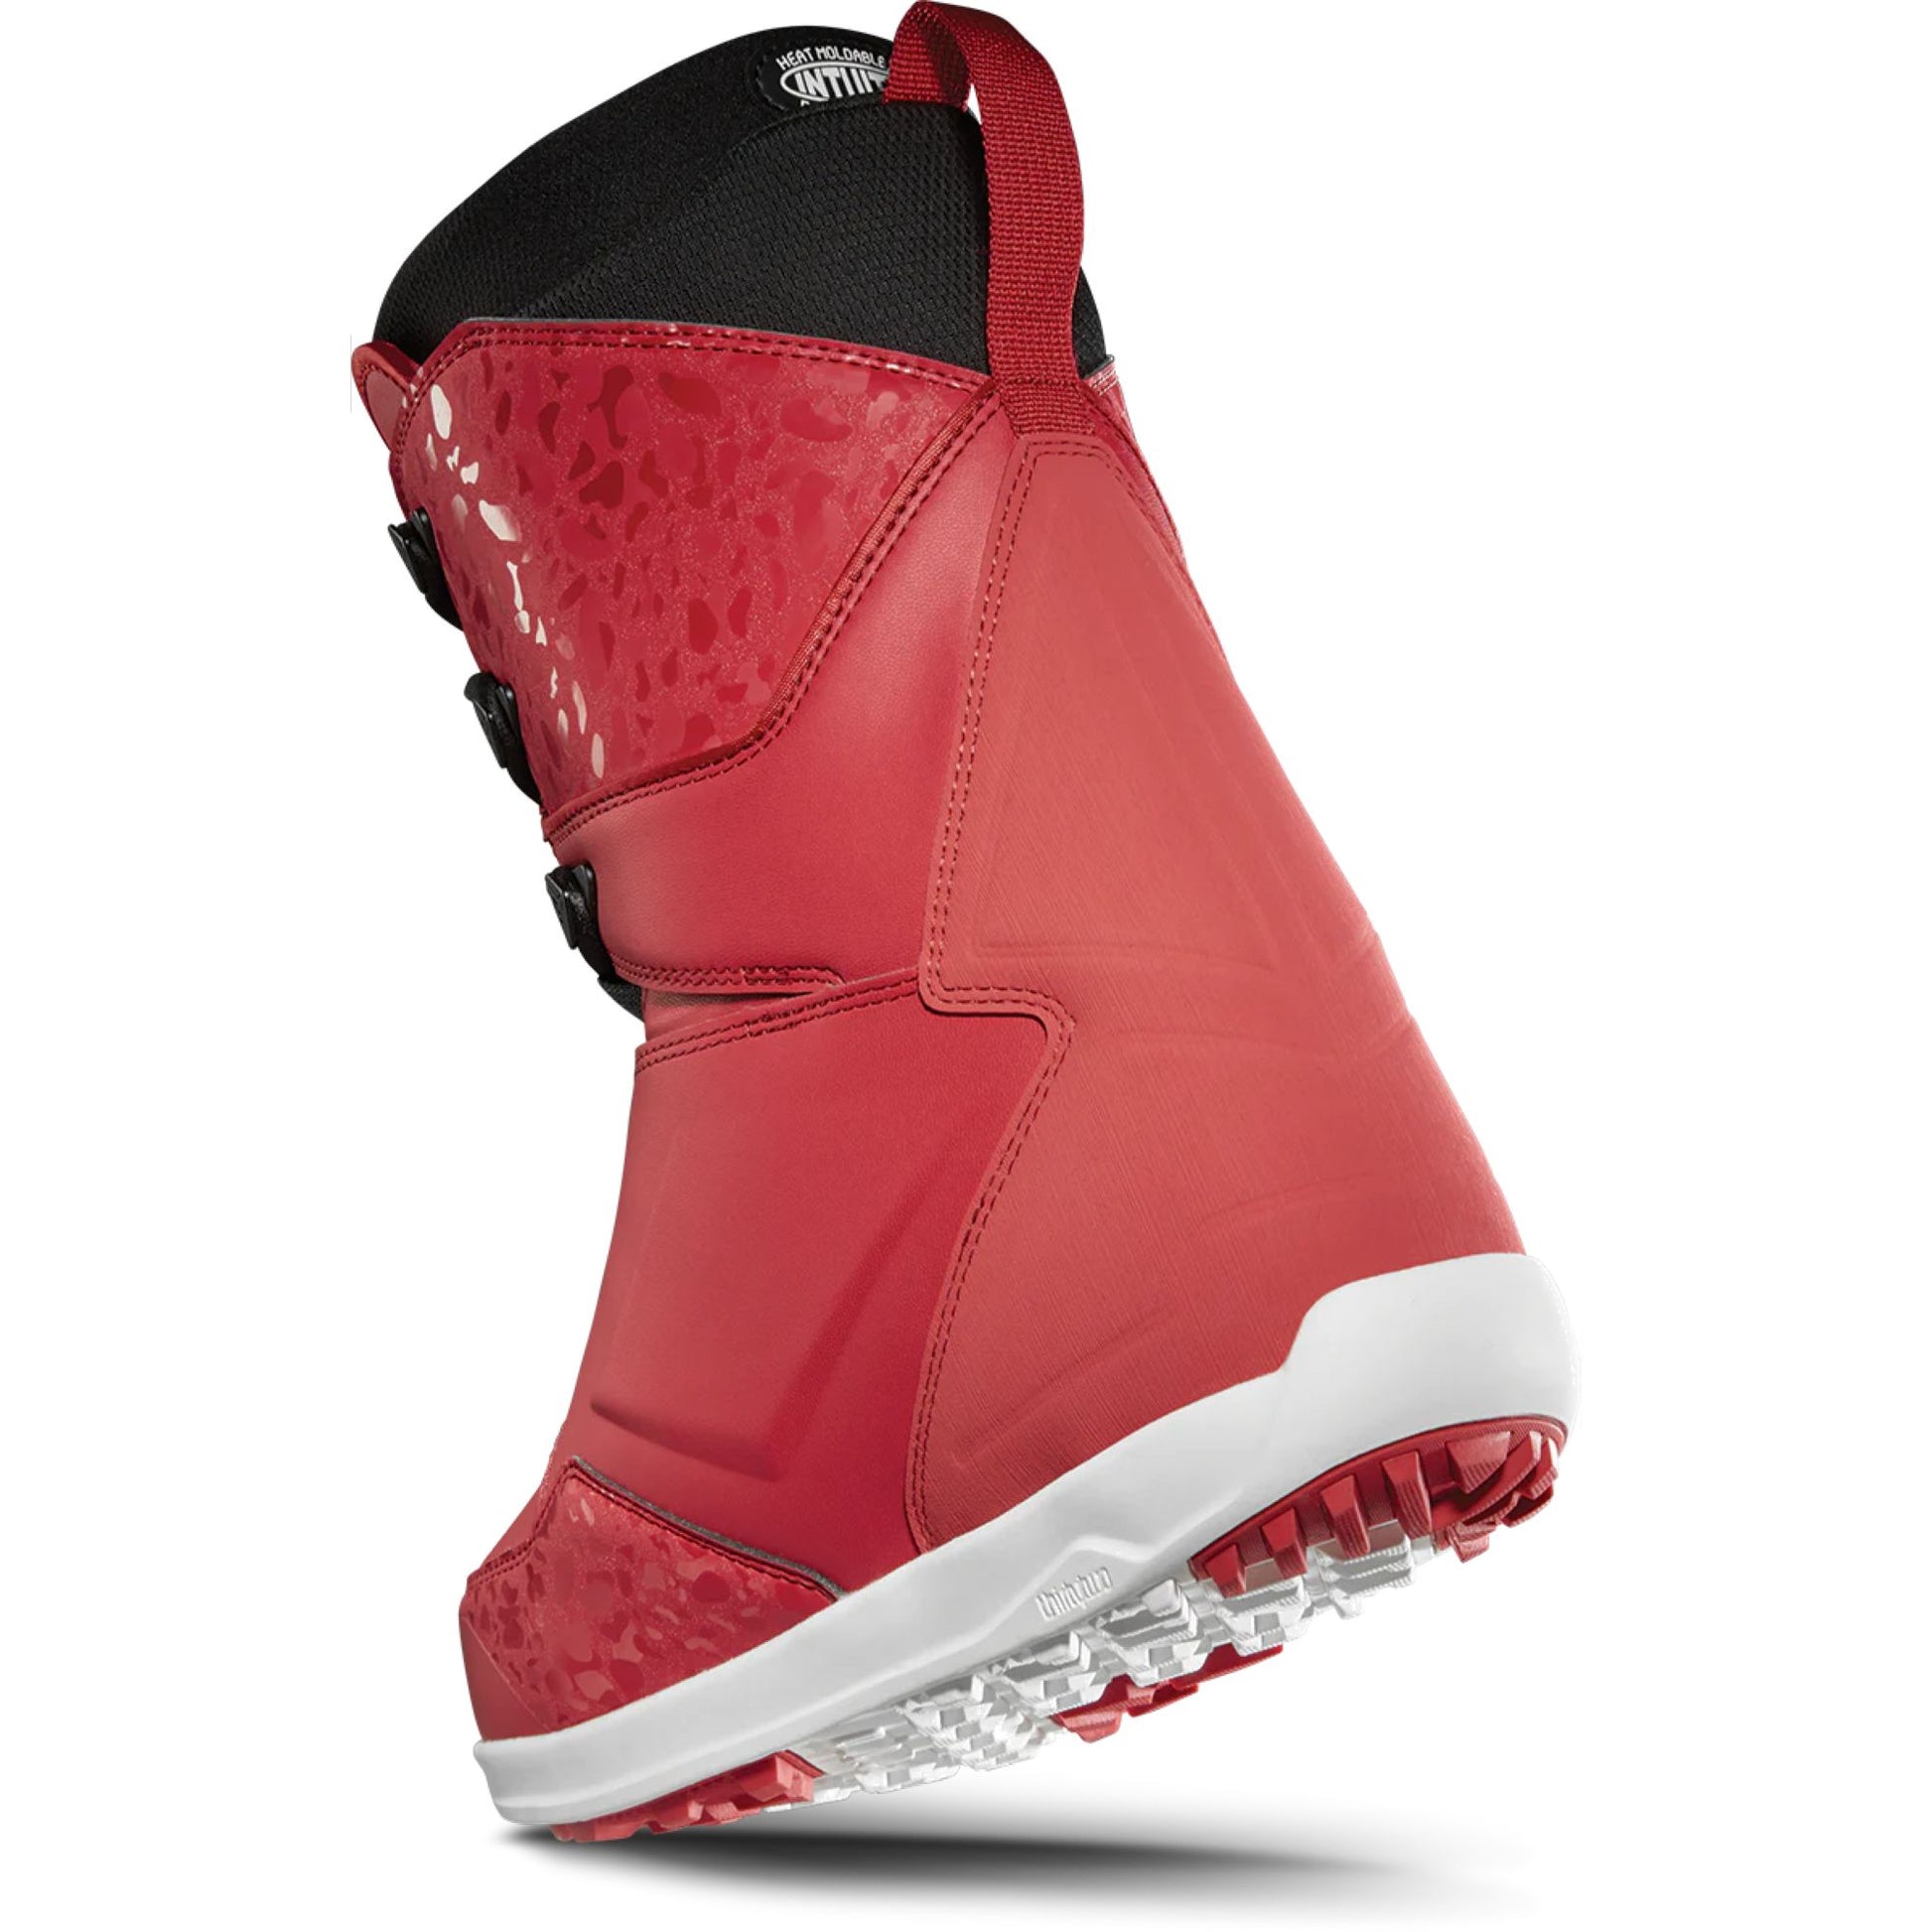 ThirtyTwo Lashed Premium Spring Break Snowboard Boots Red Snowboard Boots